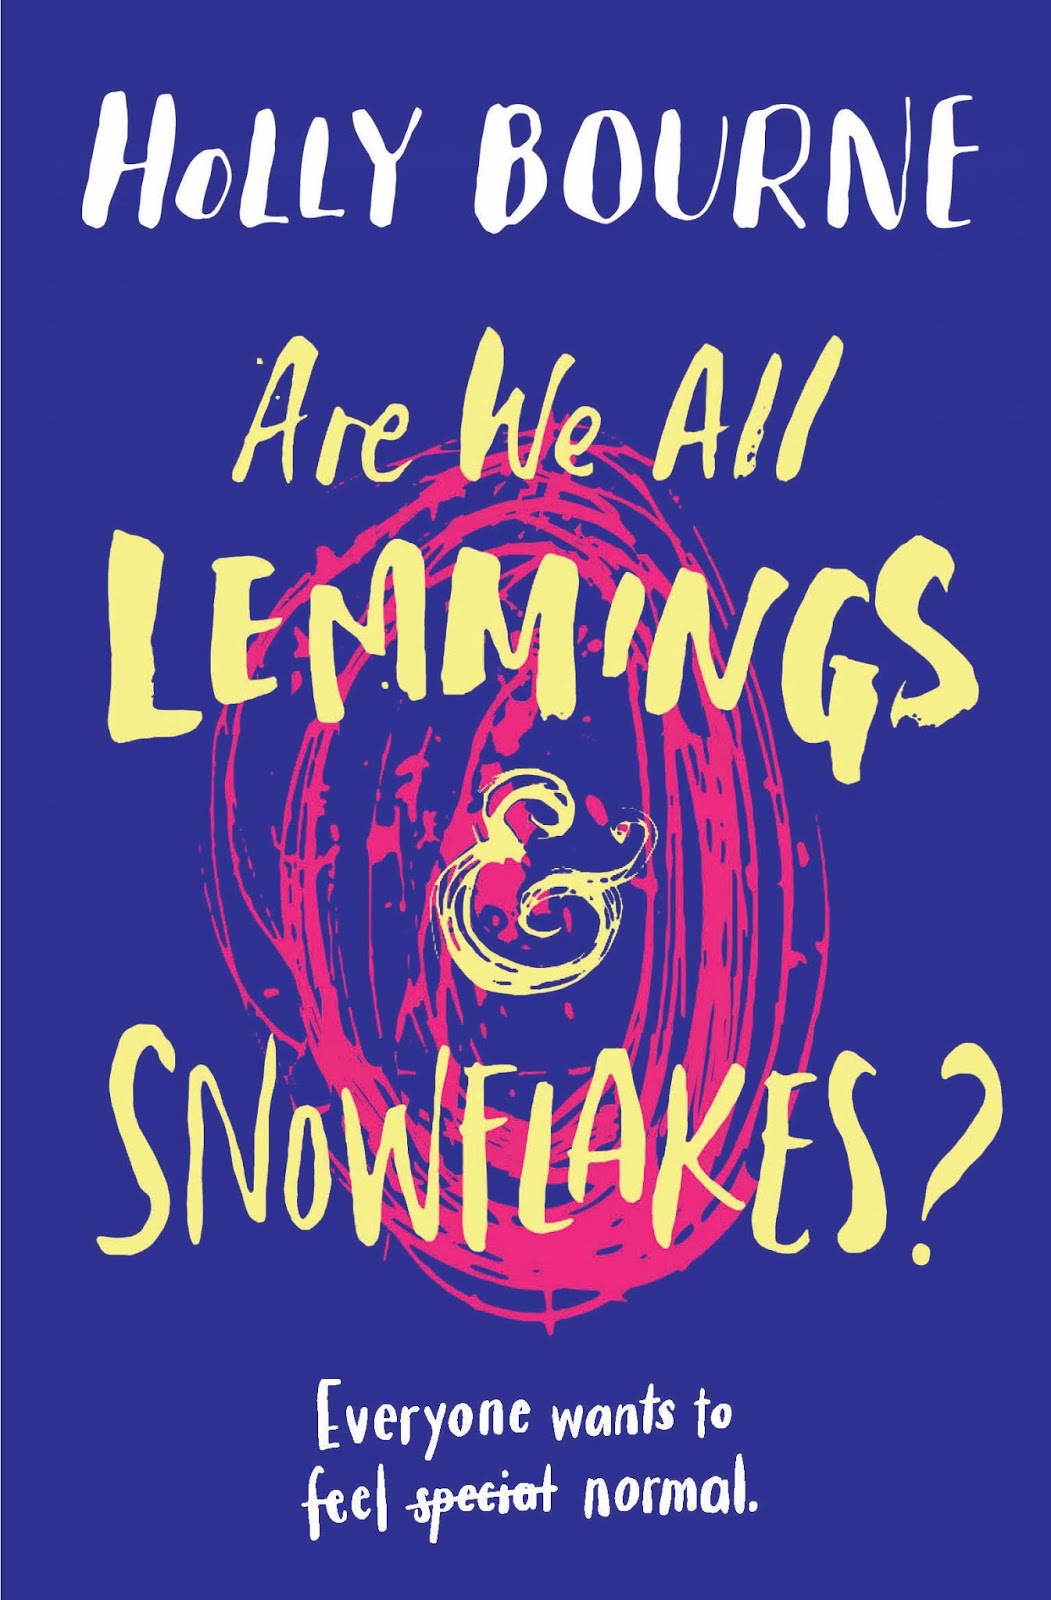 Are We All Lemmings & Snowflakes? by Holly Bourne